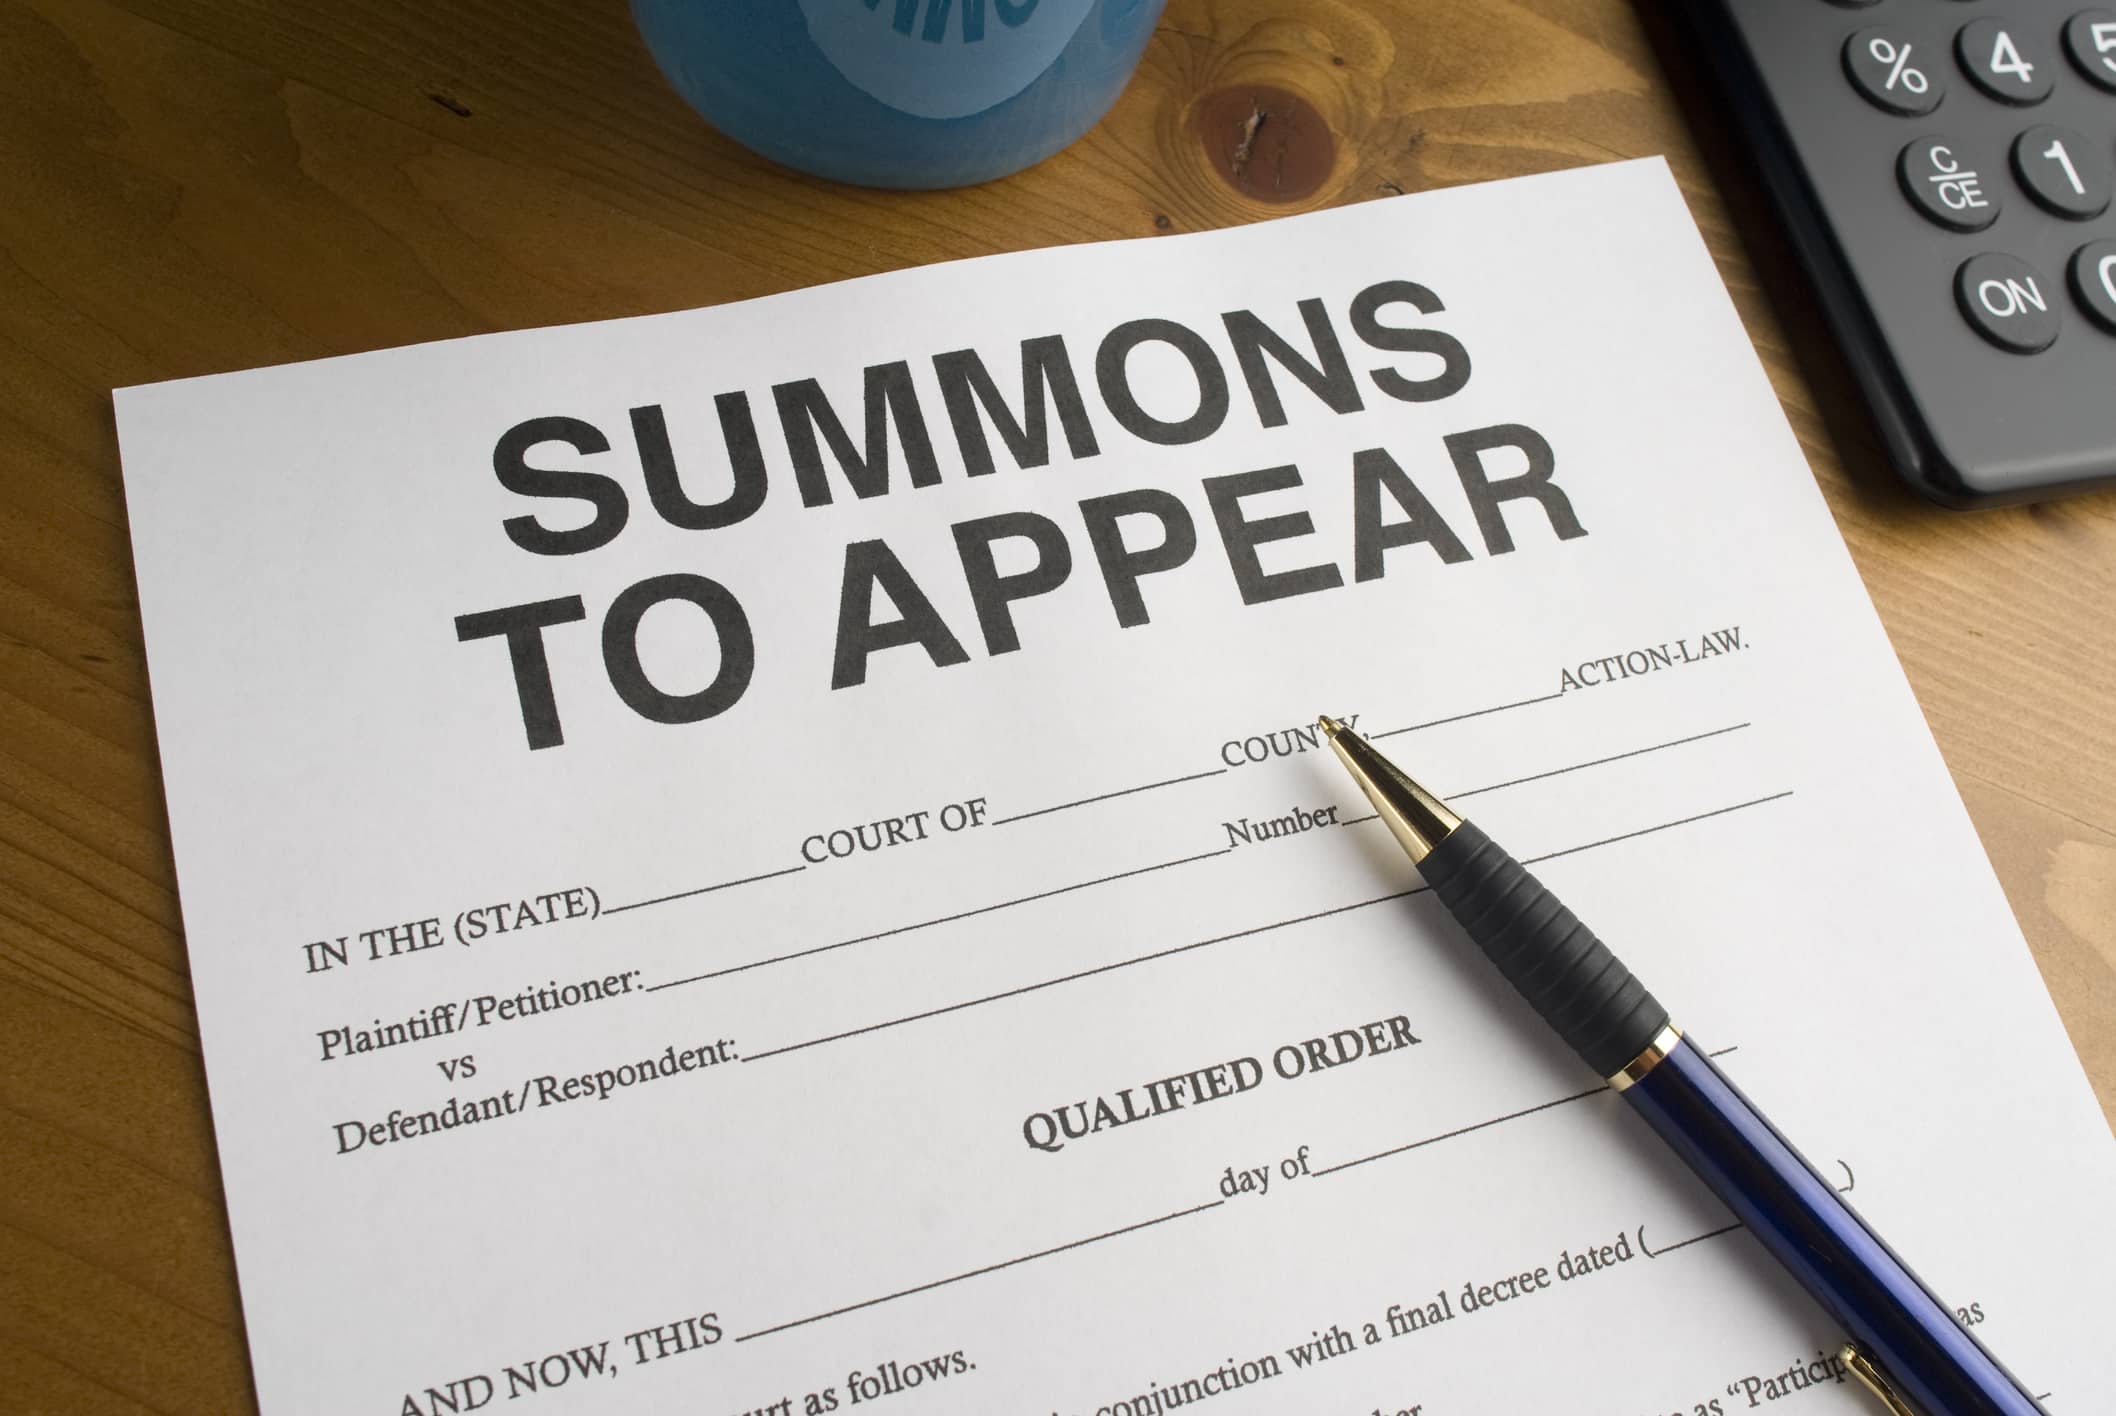 Summons to Appear